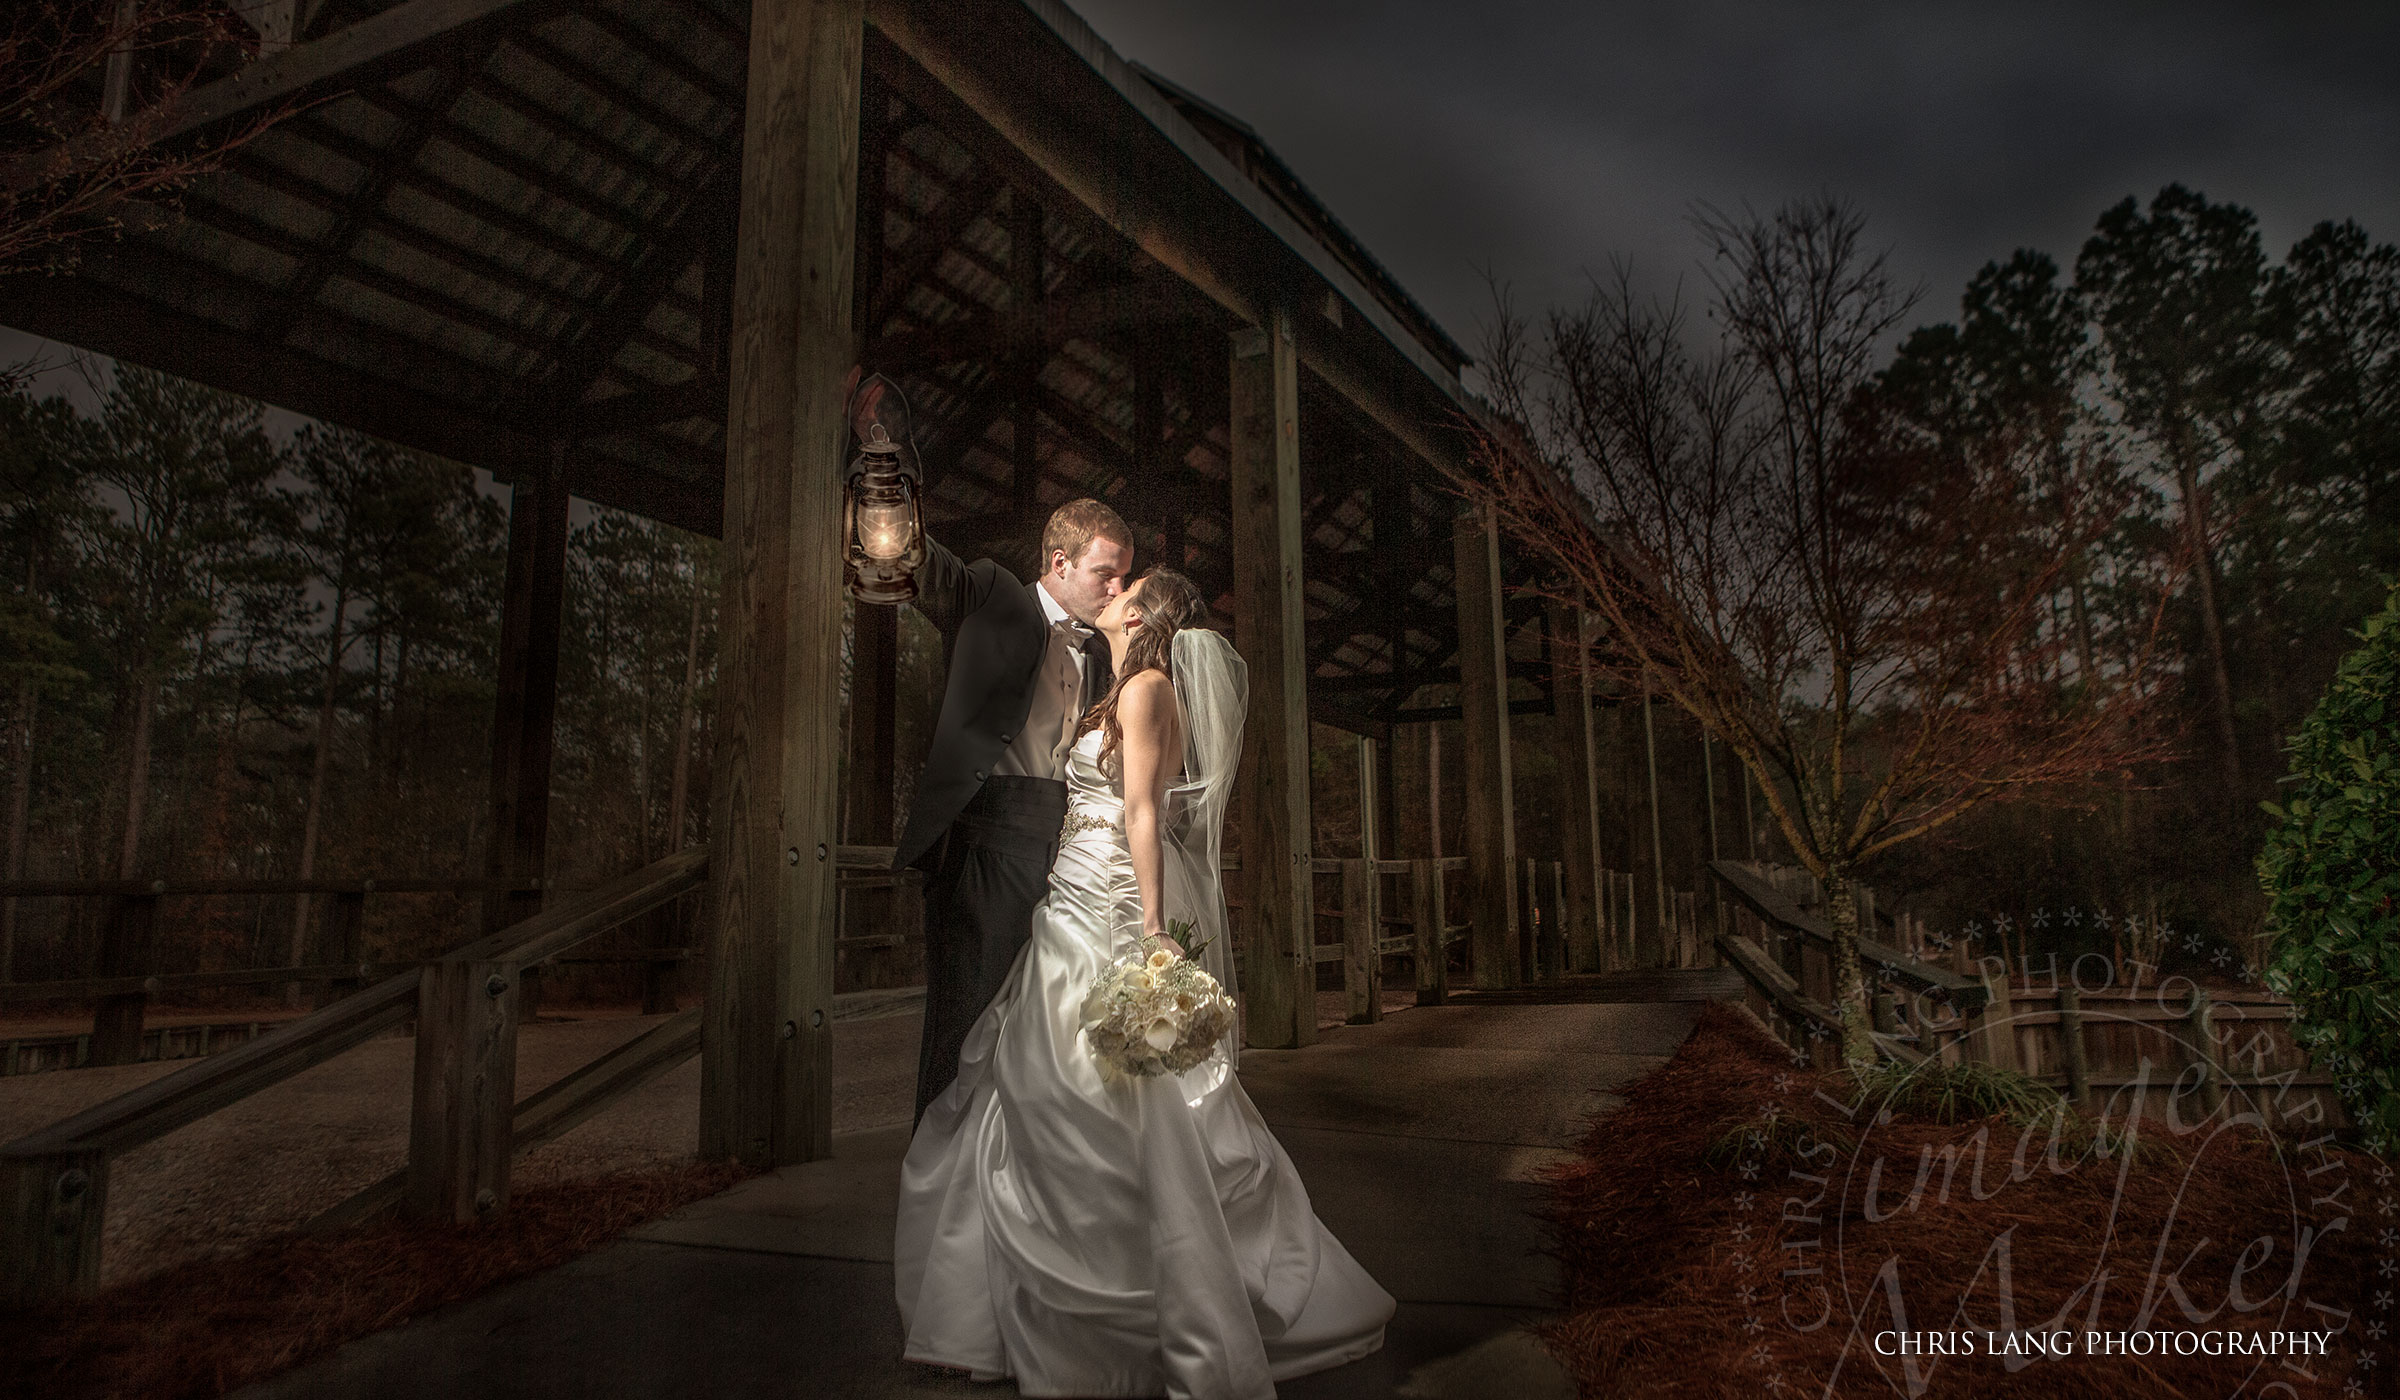 A creative wedding picture of a groom holding a lantern whilt kiissing his bride in her wedding dress. Wilmingotn NC Photographer